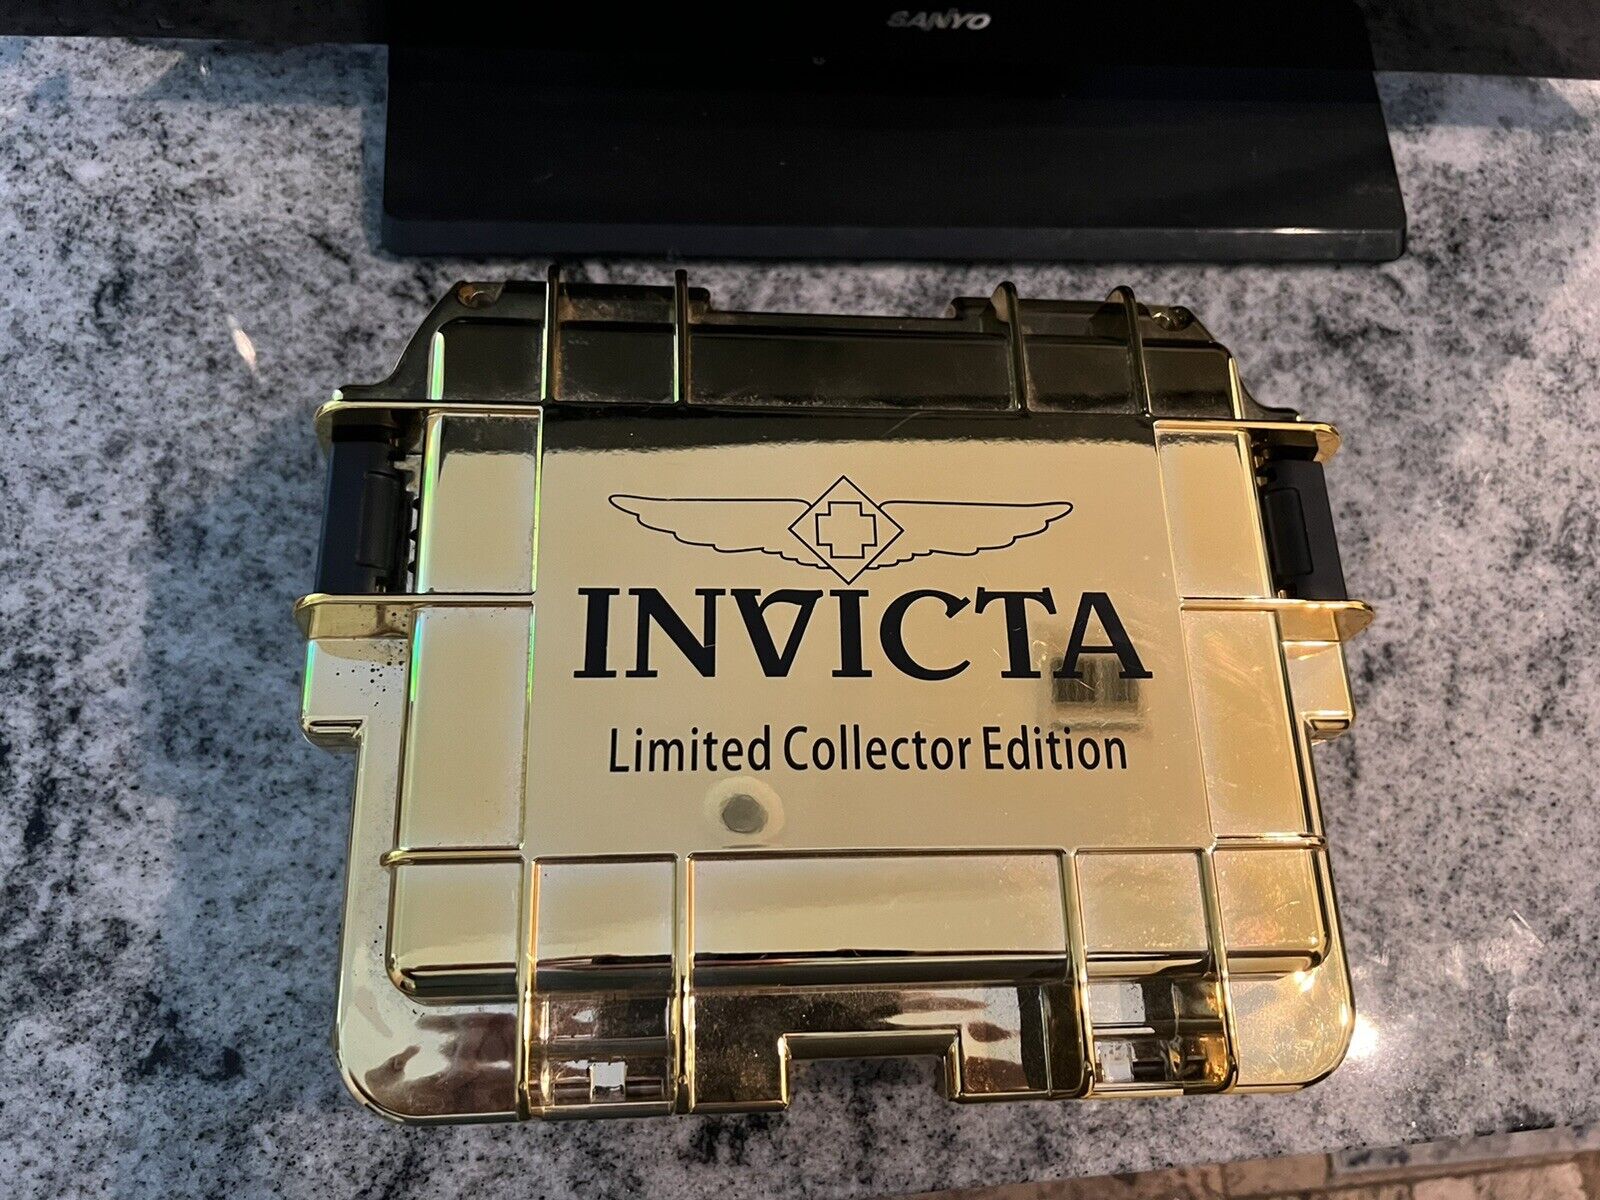 Invicta Watch Limited Collector Edition Gold 3 Slot Waterproof Case Foam Inserts